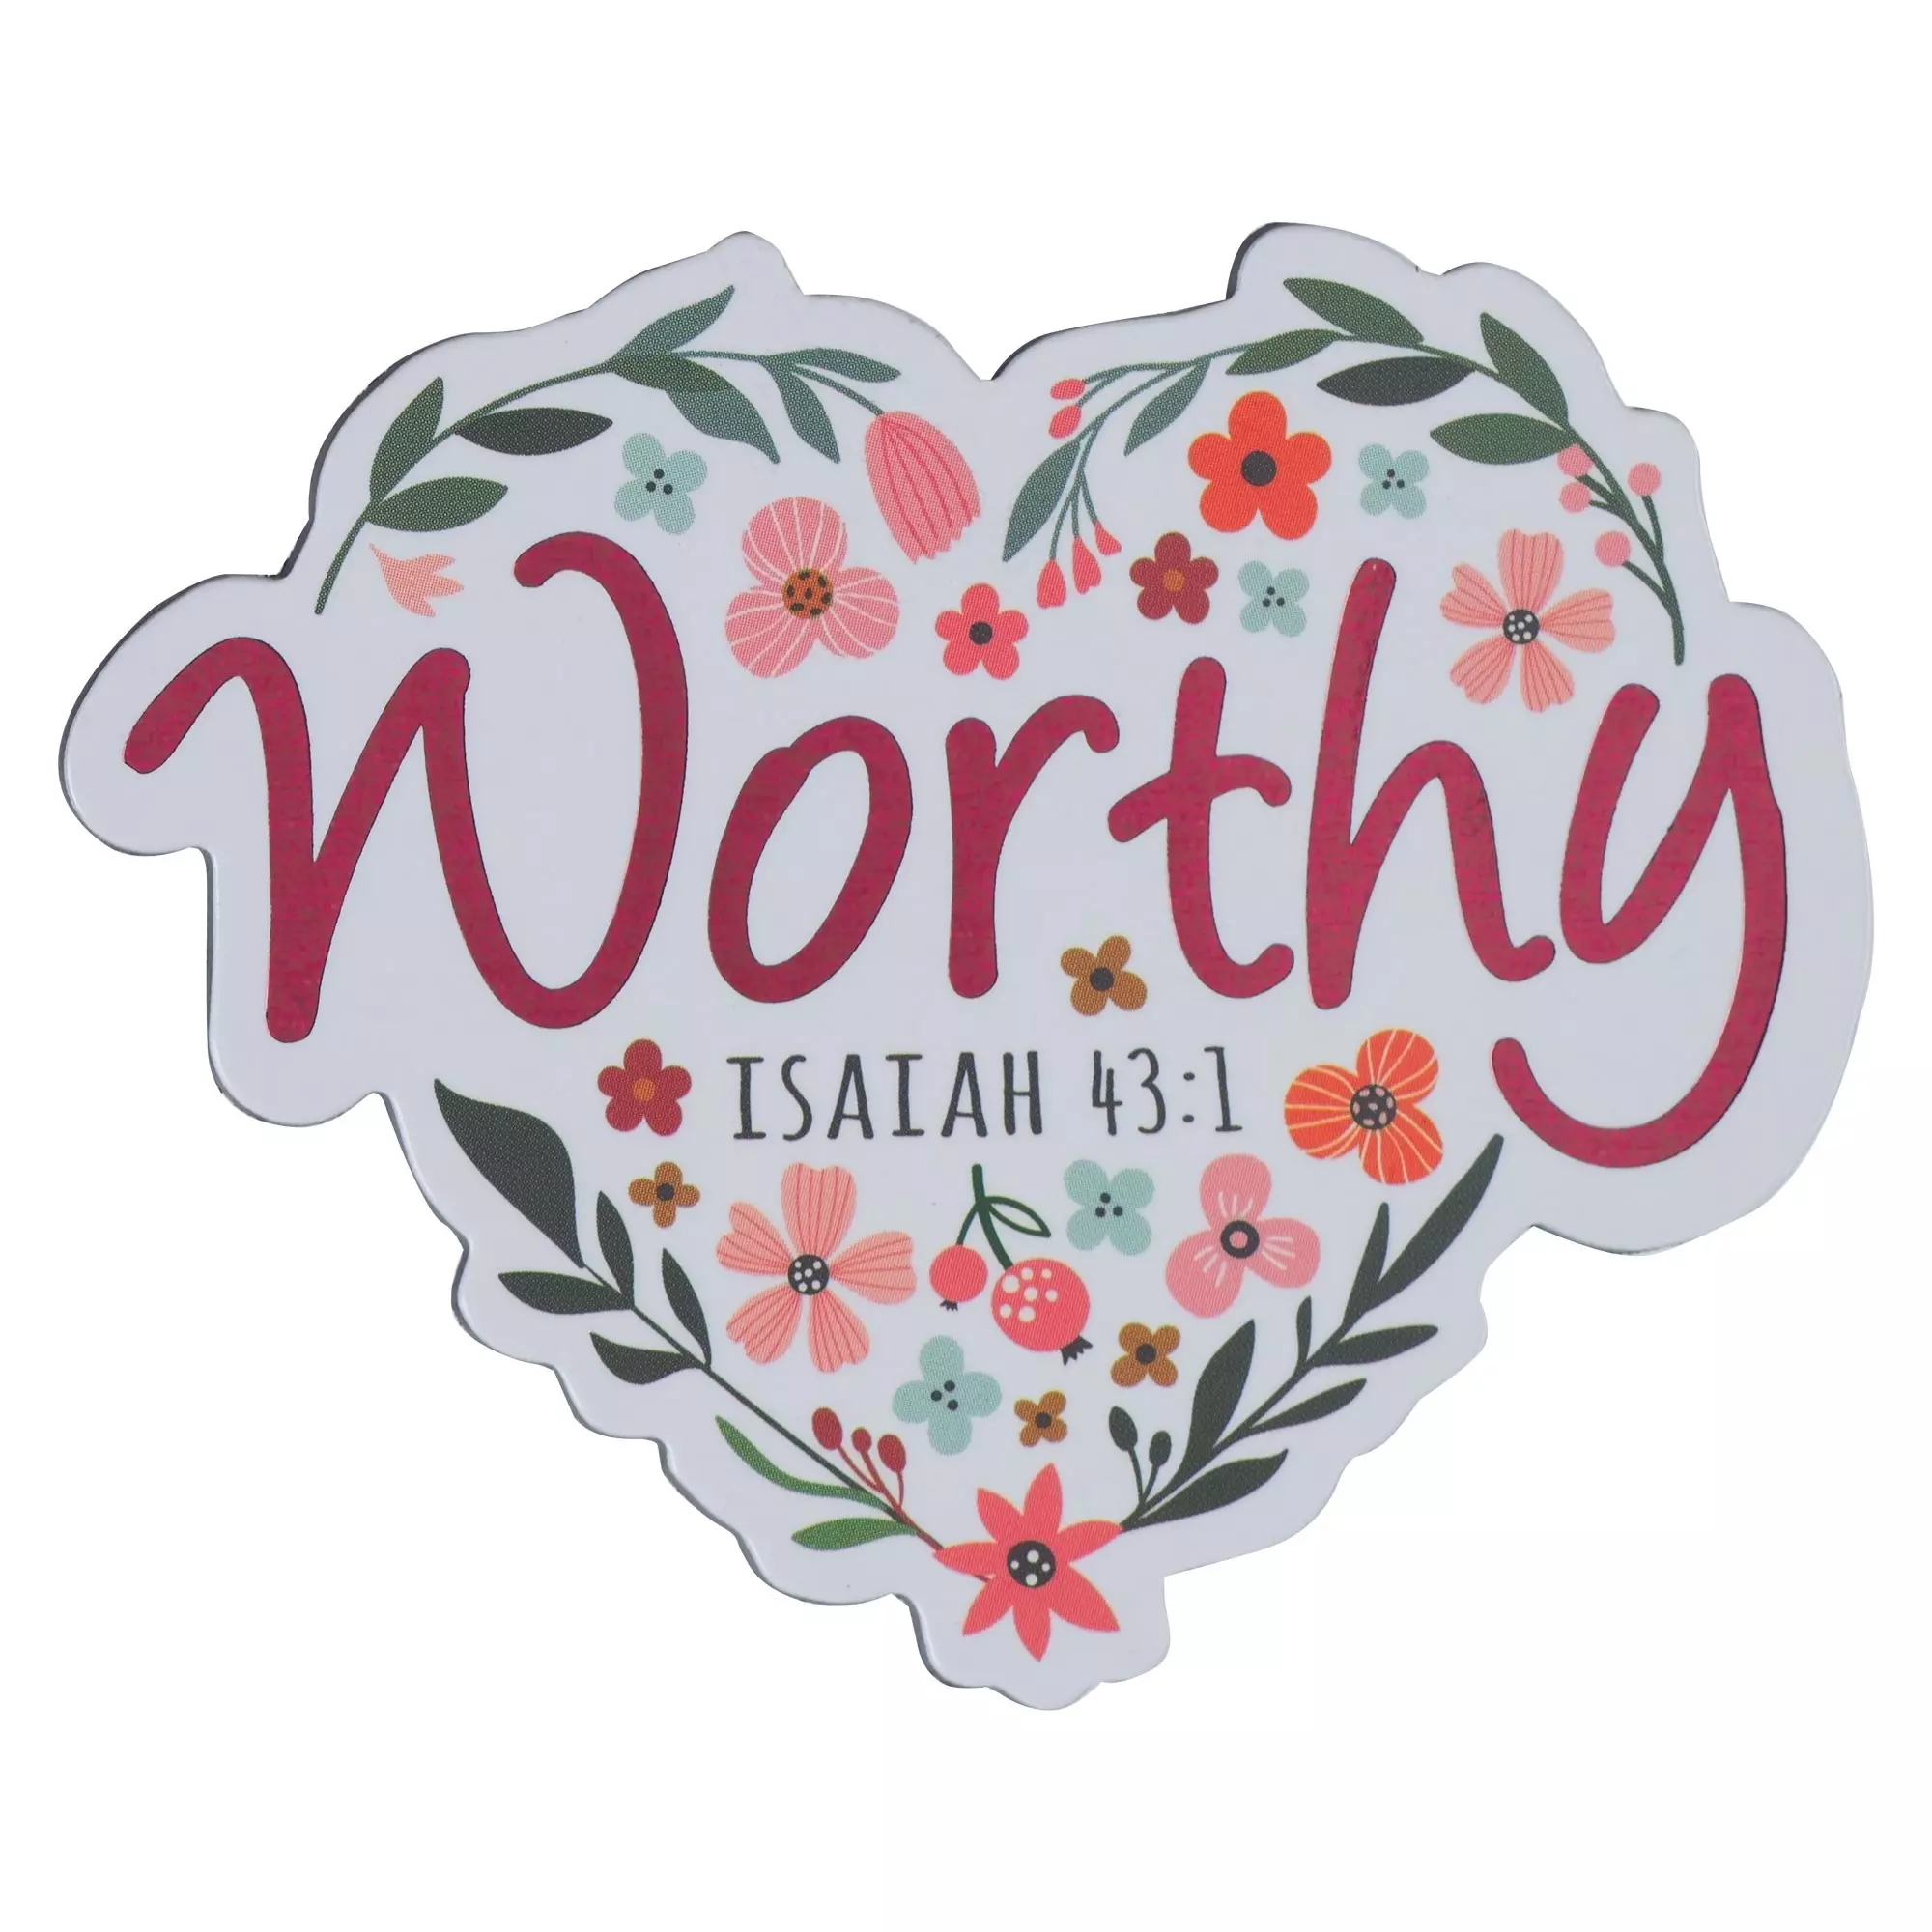 Magnet White Floral Worthy Isa. 43:1